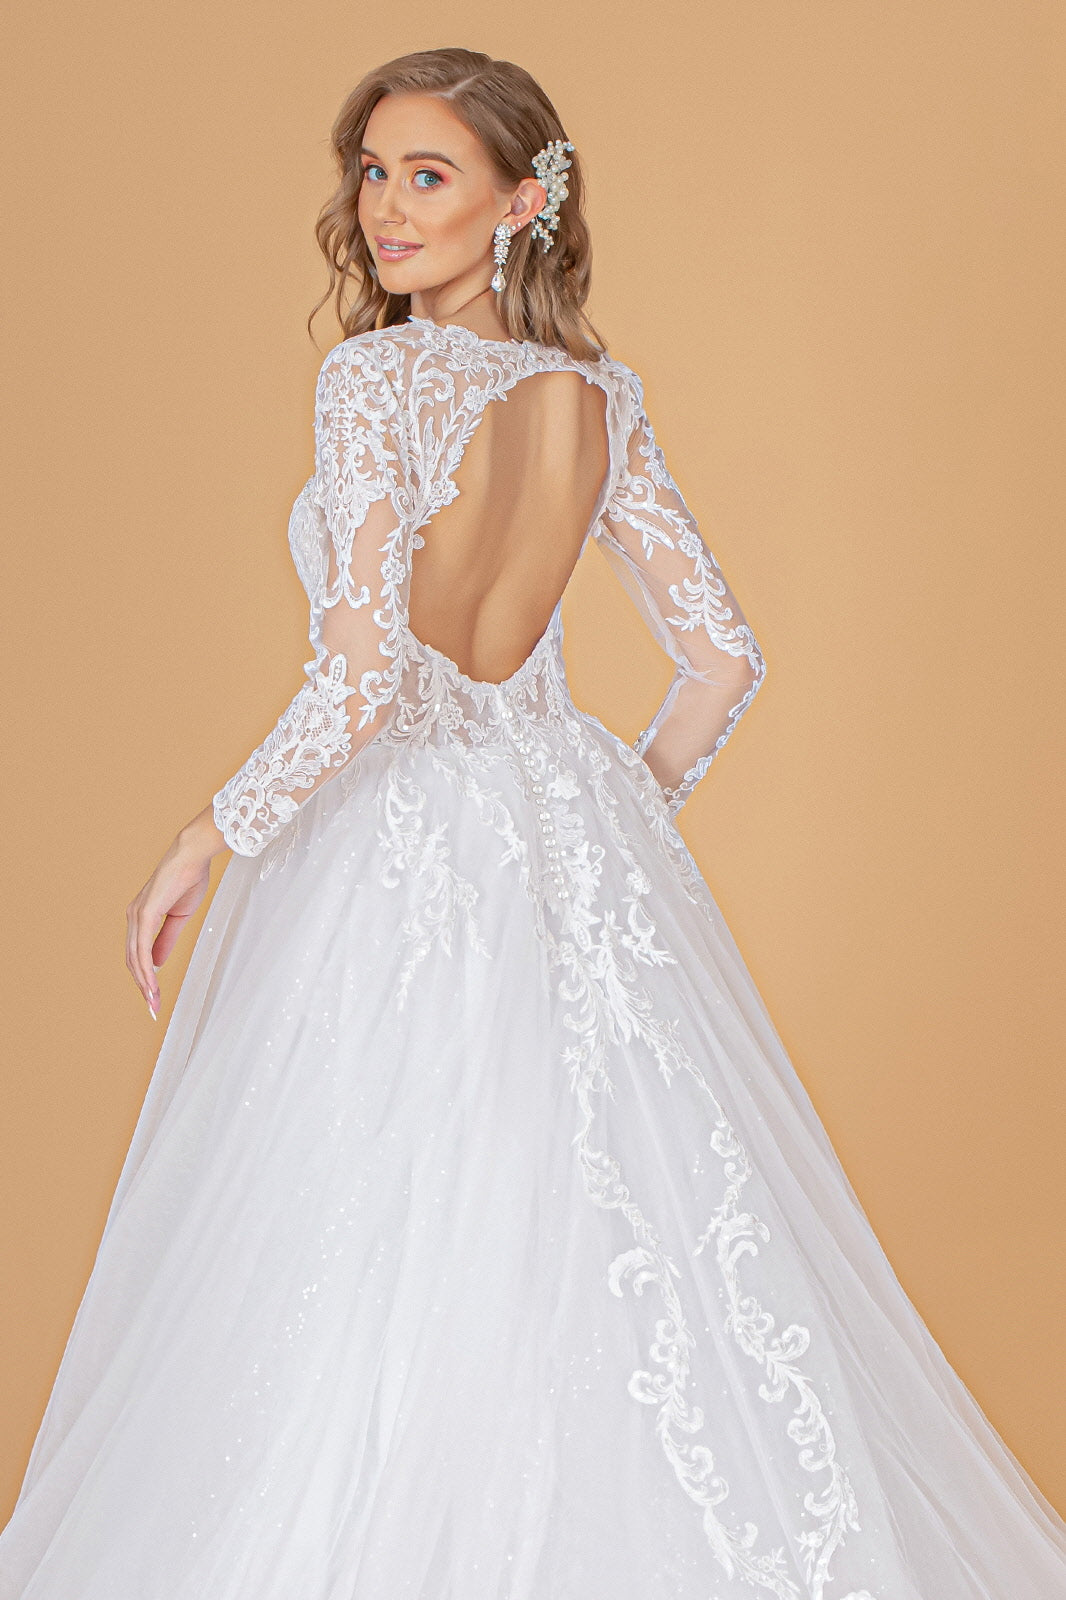 amelia sposa 2016 wedding dresses off the shoulder lace long sleeves  embroidered bodice gorgeous a line ball gown wedding dress nova | Wedding  Inspirasi